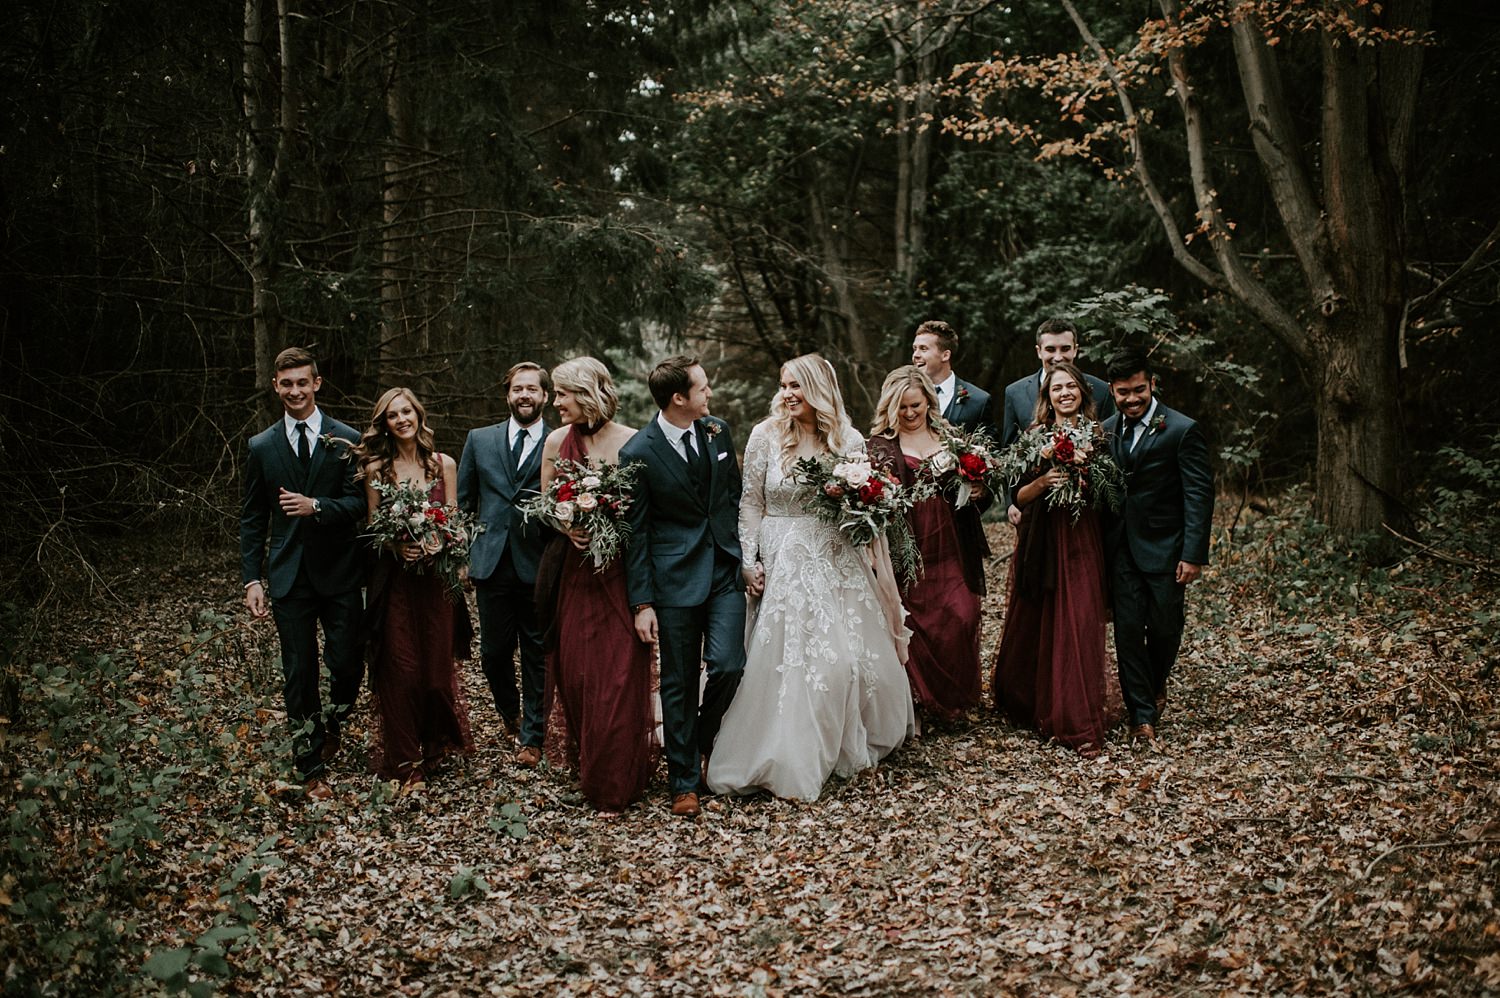 Rustic bridal party at The Webb Barn in Wethersfield, CTRustic bridal party at The Webb Barn in Wethersfield, CT